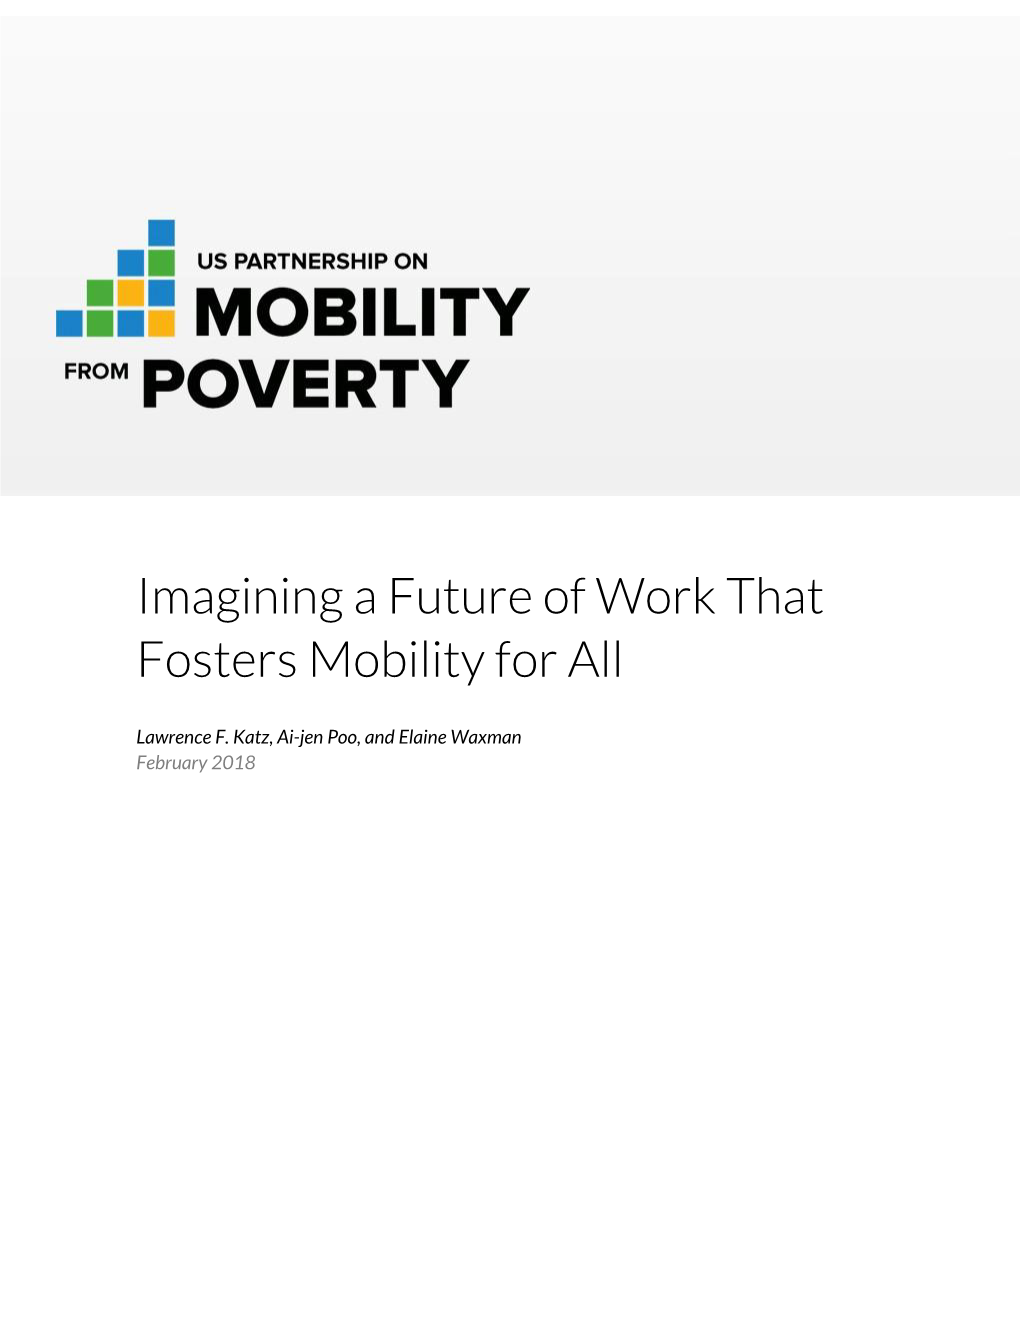 Imagining a Future of Work That Fosters Mobility for All